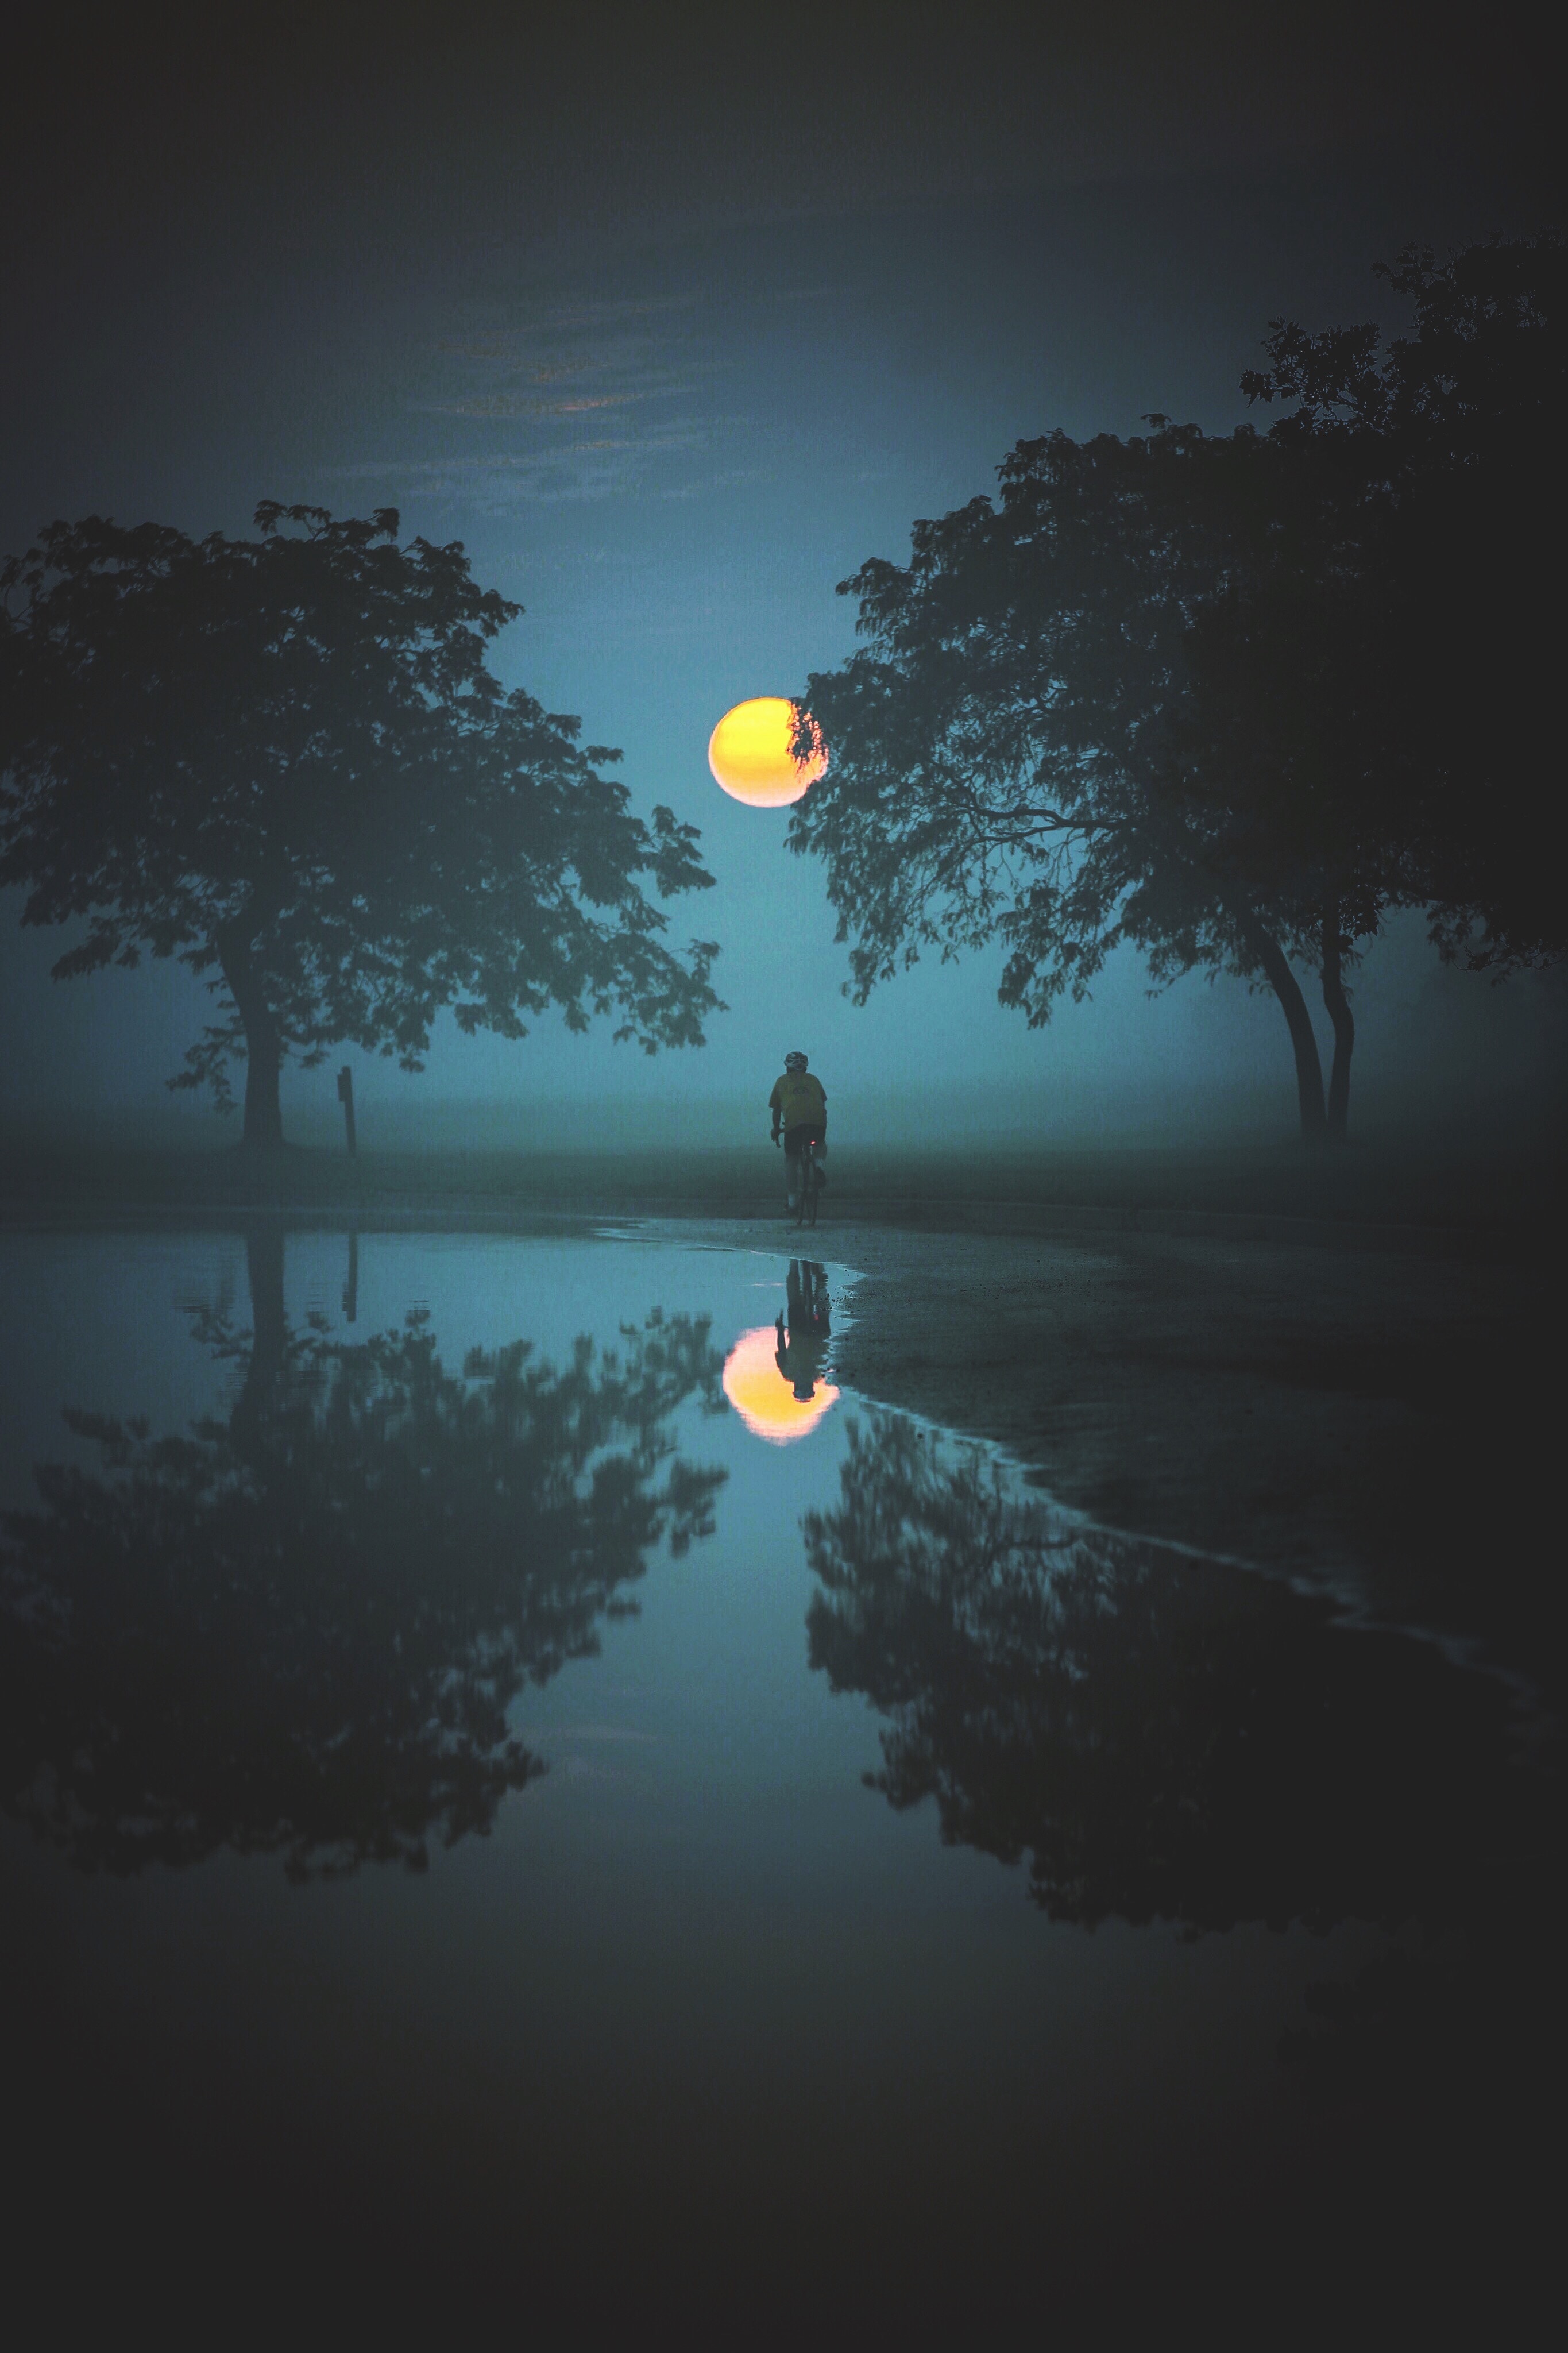 reflection, moon, cyclist, nature, water, trees, fog images